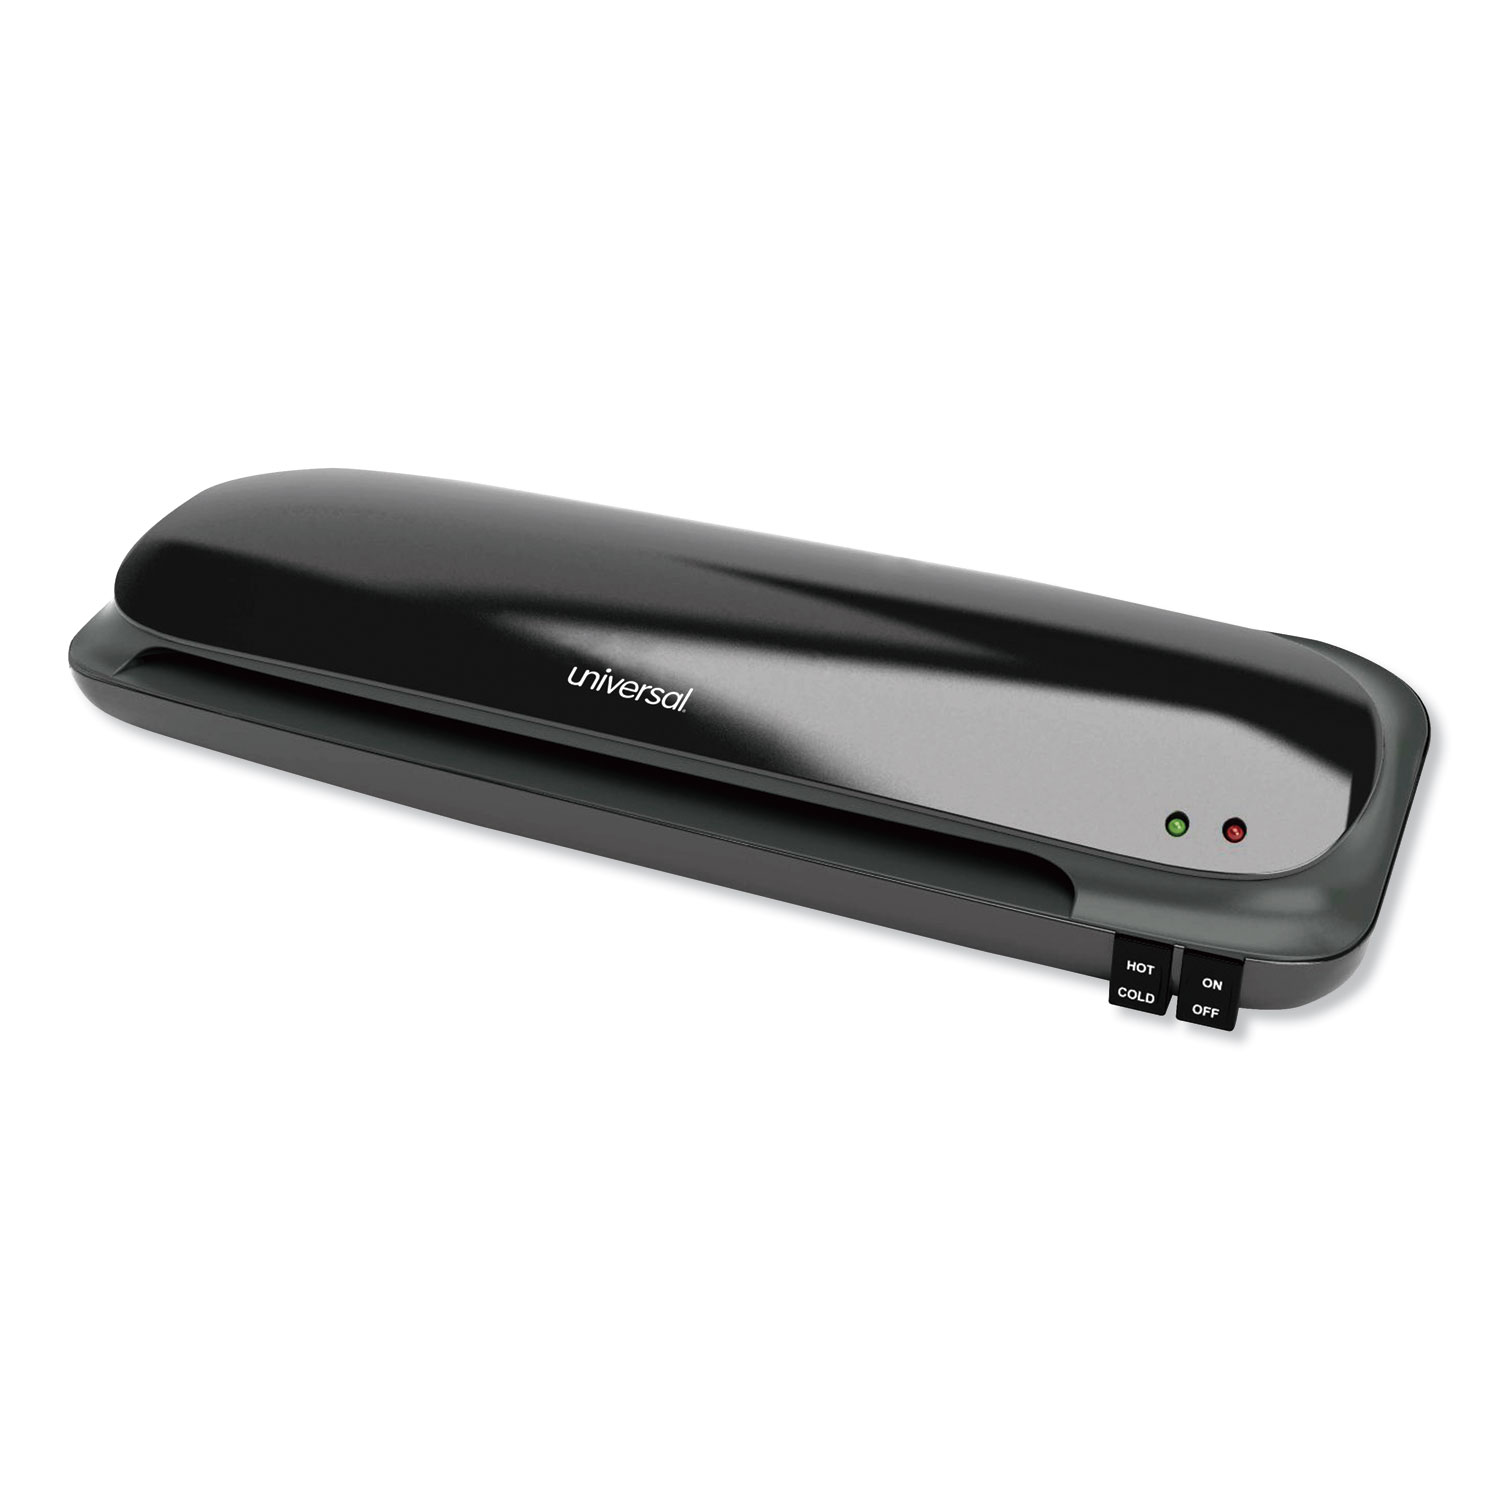  Universal UNV84612 Deluxe Desktop Laminator, 2 Rollers, 12 Max Document Width, 5 mil Max Document Thickness (UNV84612) 